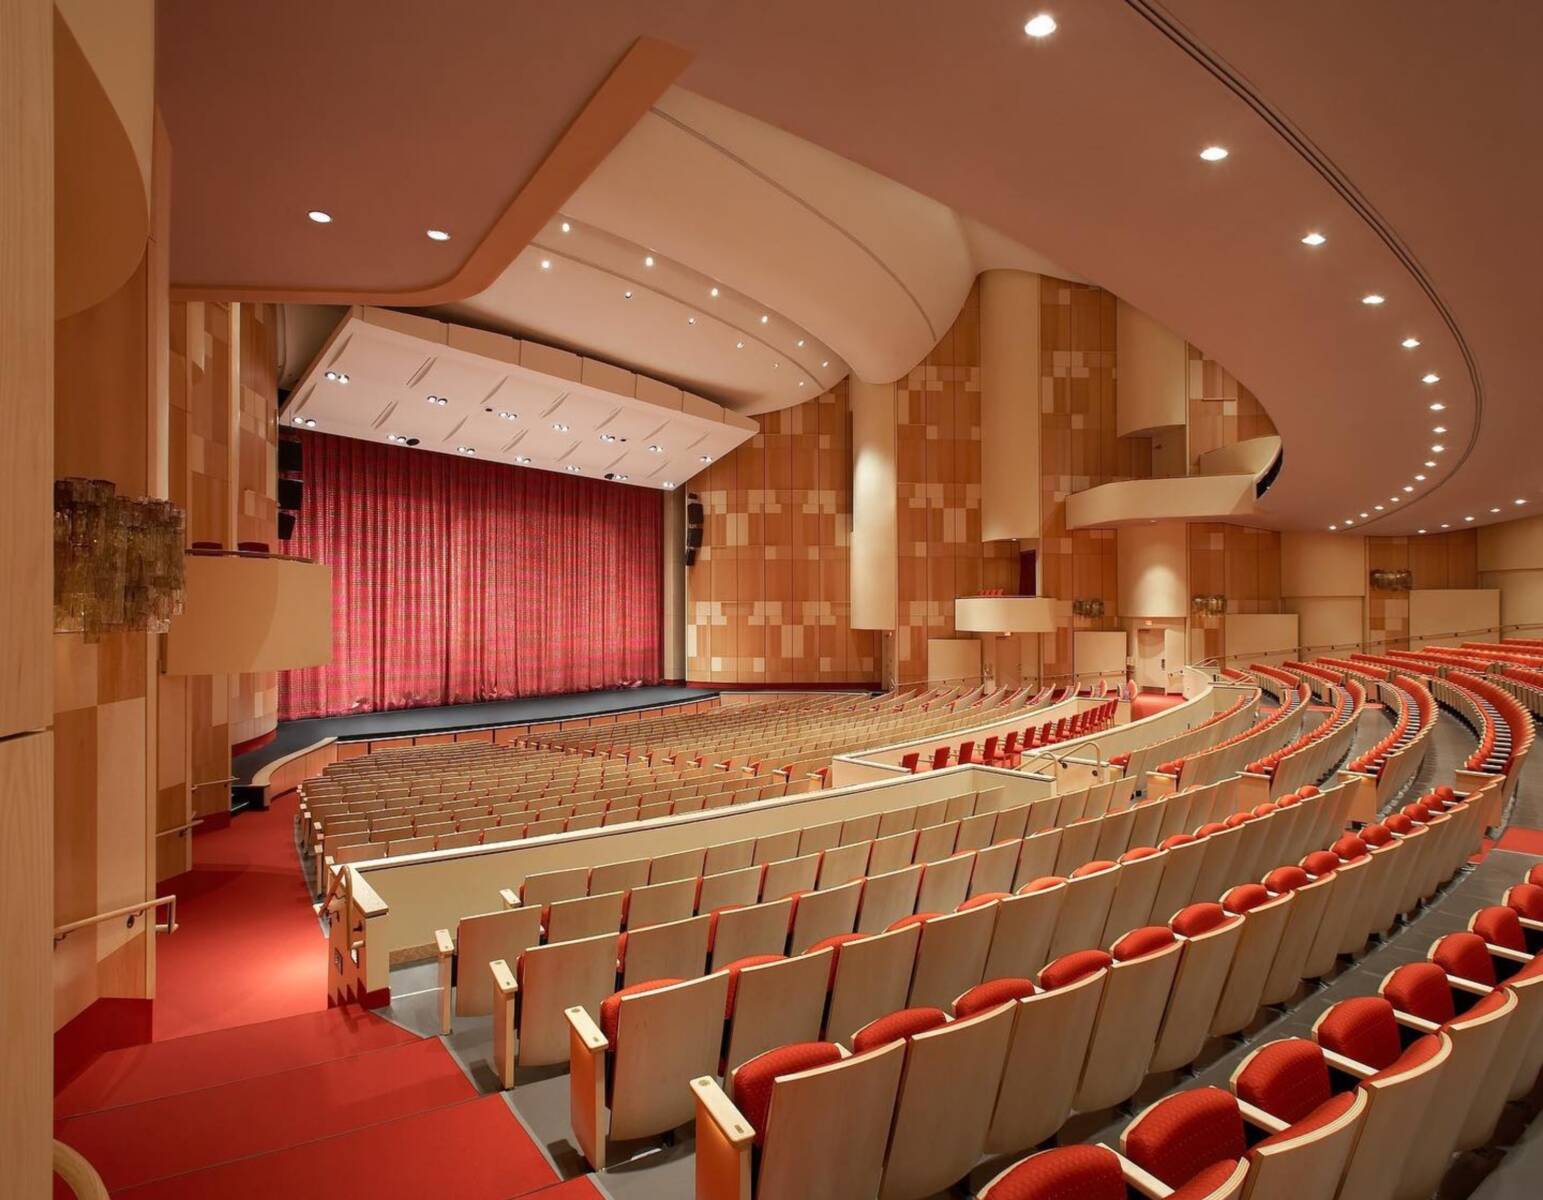 An auditorium comprising hundreds of seats over a nicely themed, red and gray flooring contrast